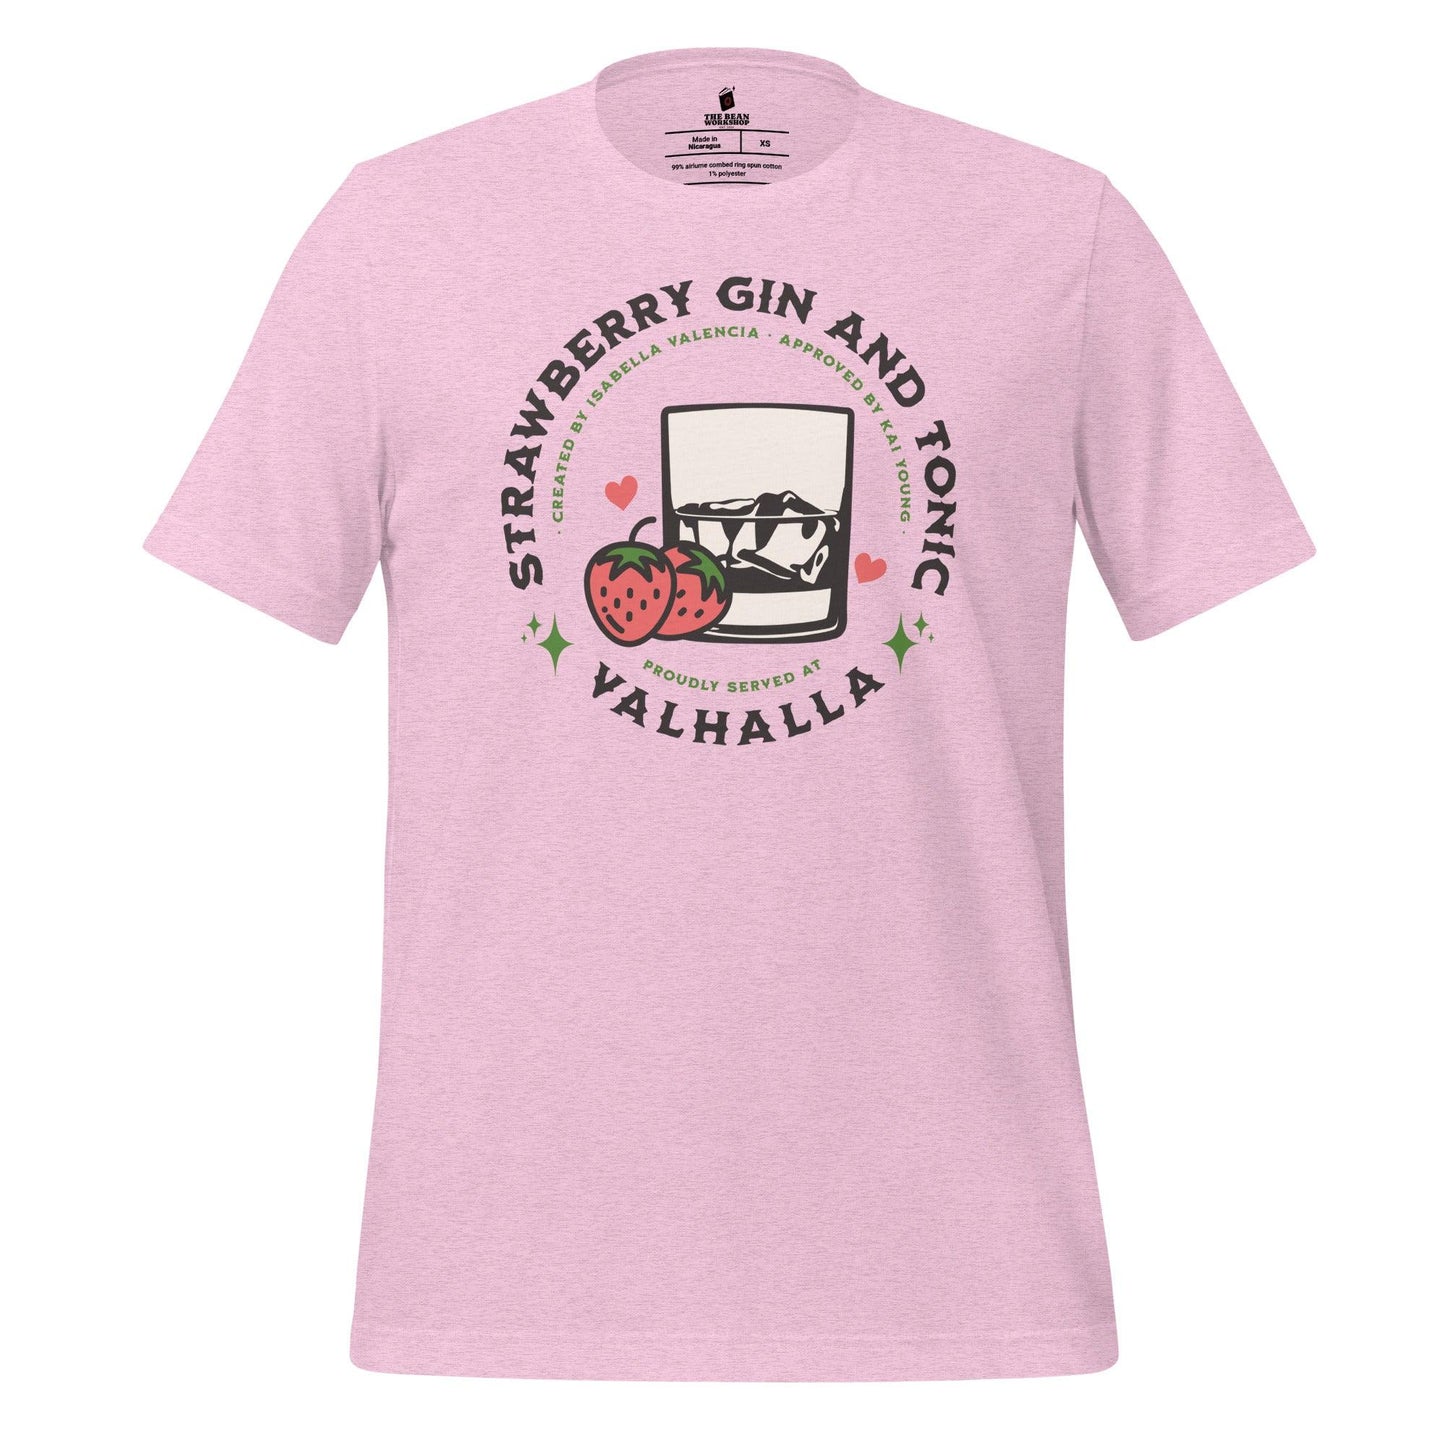 Strawberry Gin and Tonic - Kai & Isabelle T-Shirt - The Bean Workshop - ana huang, kings of sin, t-shirt